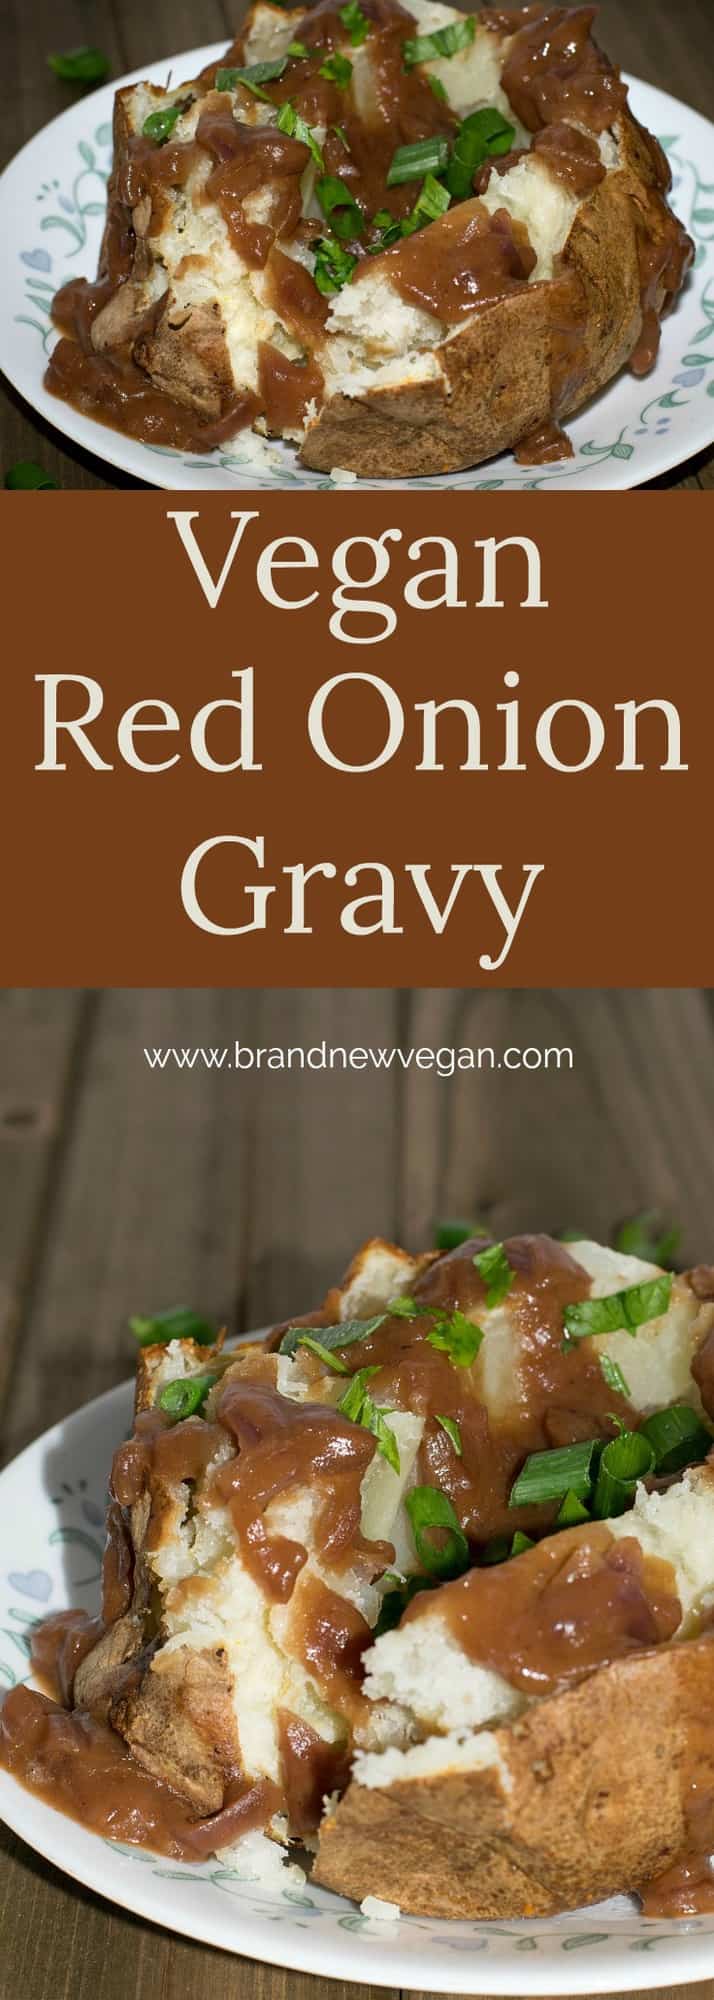 This Vegan Red Onion Gravy will surely be the hit of the party. A rich, flavorful gravy perfect for ladling over fluffy baked potatoes, or that Holiday Lentil Loaf. 